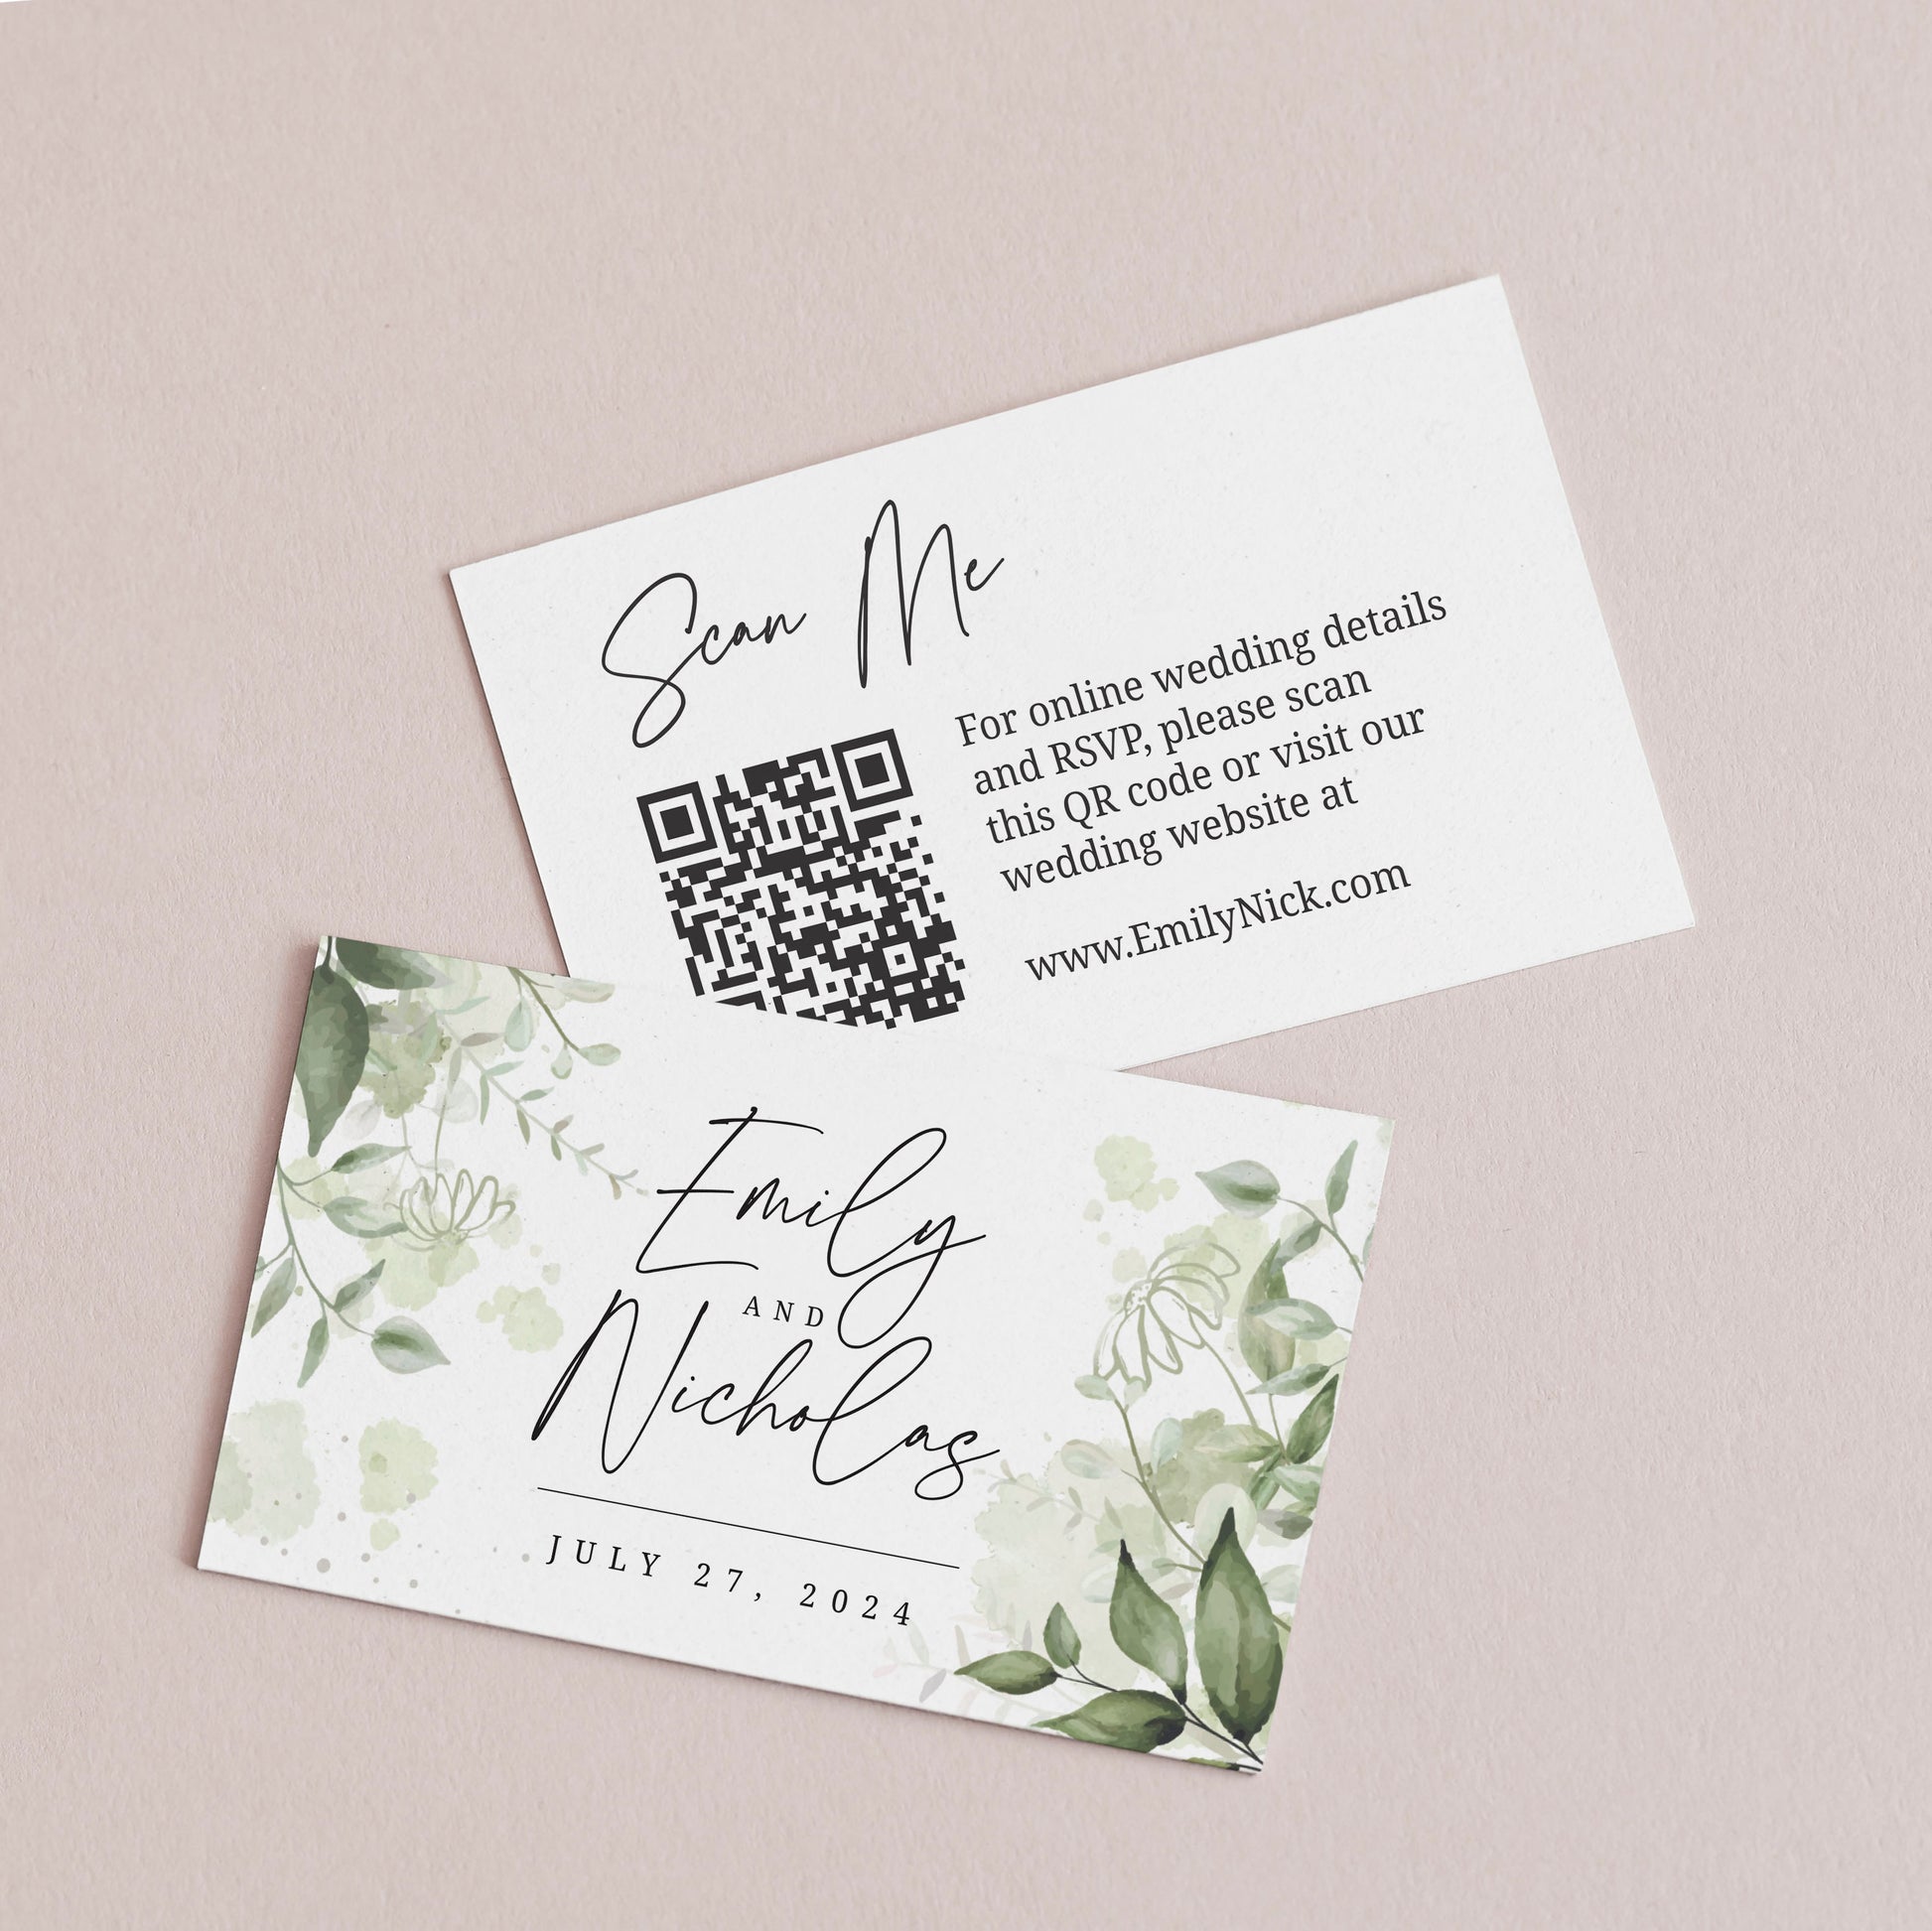 Image of Personalized Wedding Website Card with modern calligraphy and greenery floral design